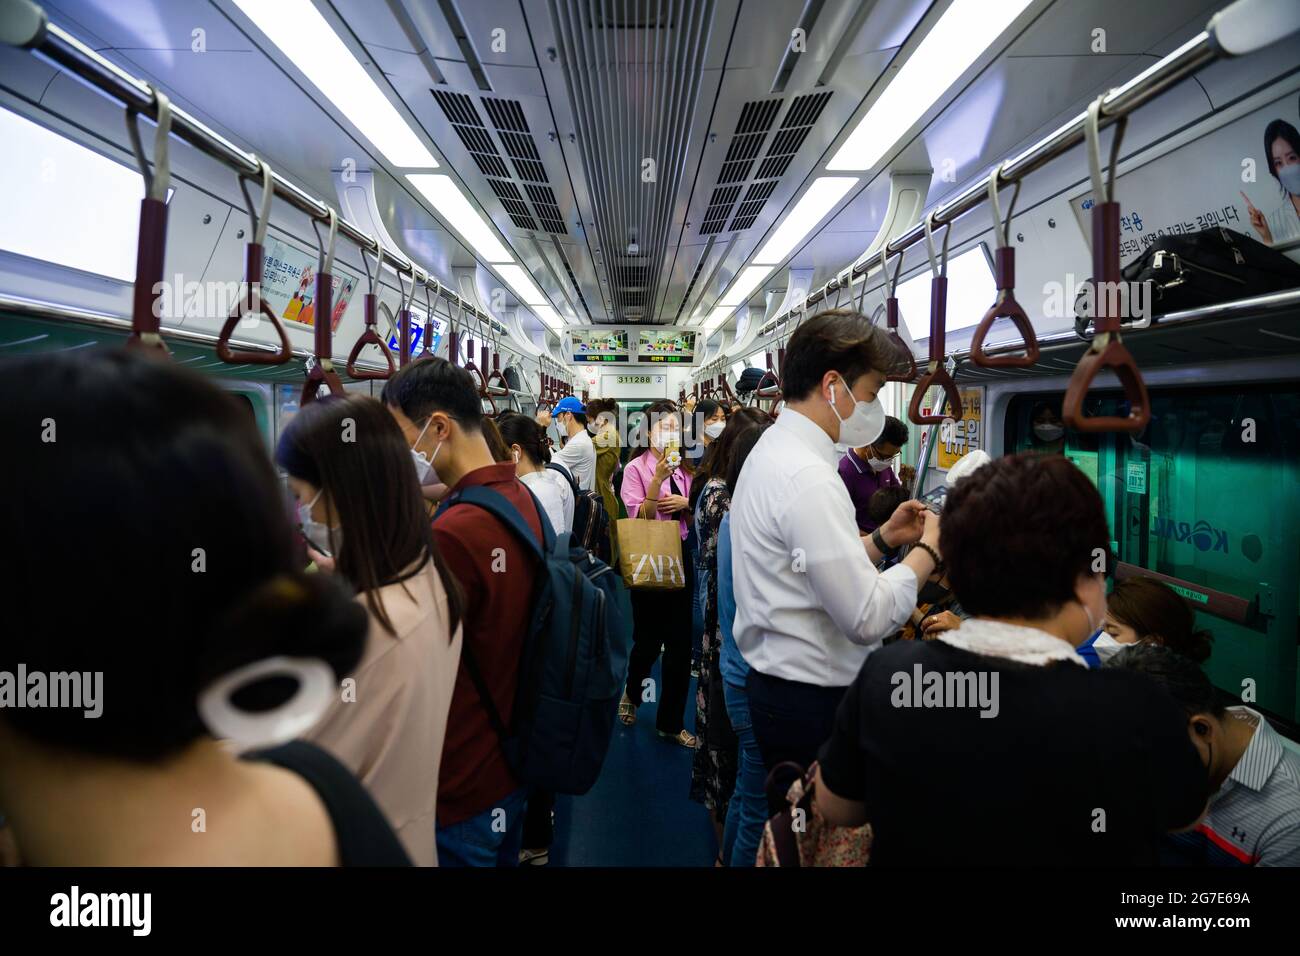 July 13, 2021, Bucheon, Bucheon, South Korea: Subway riders in Seoul crowd a train as South Korea enters its second day of a quasi-lockdown amid a record surge in coronavirus outbreaks. (Credit Image: © Jintak Han/ZUMA Wire) Stock Photo